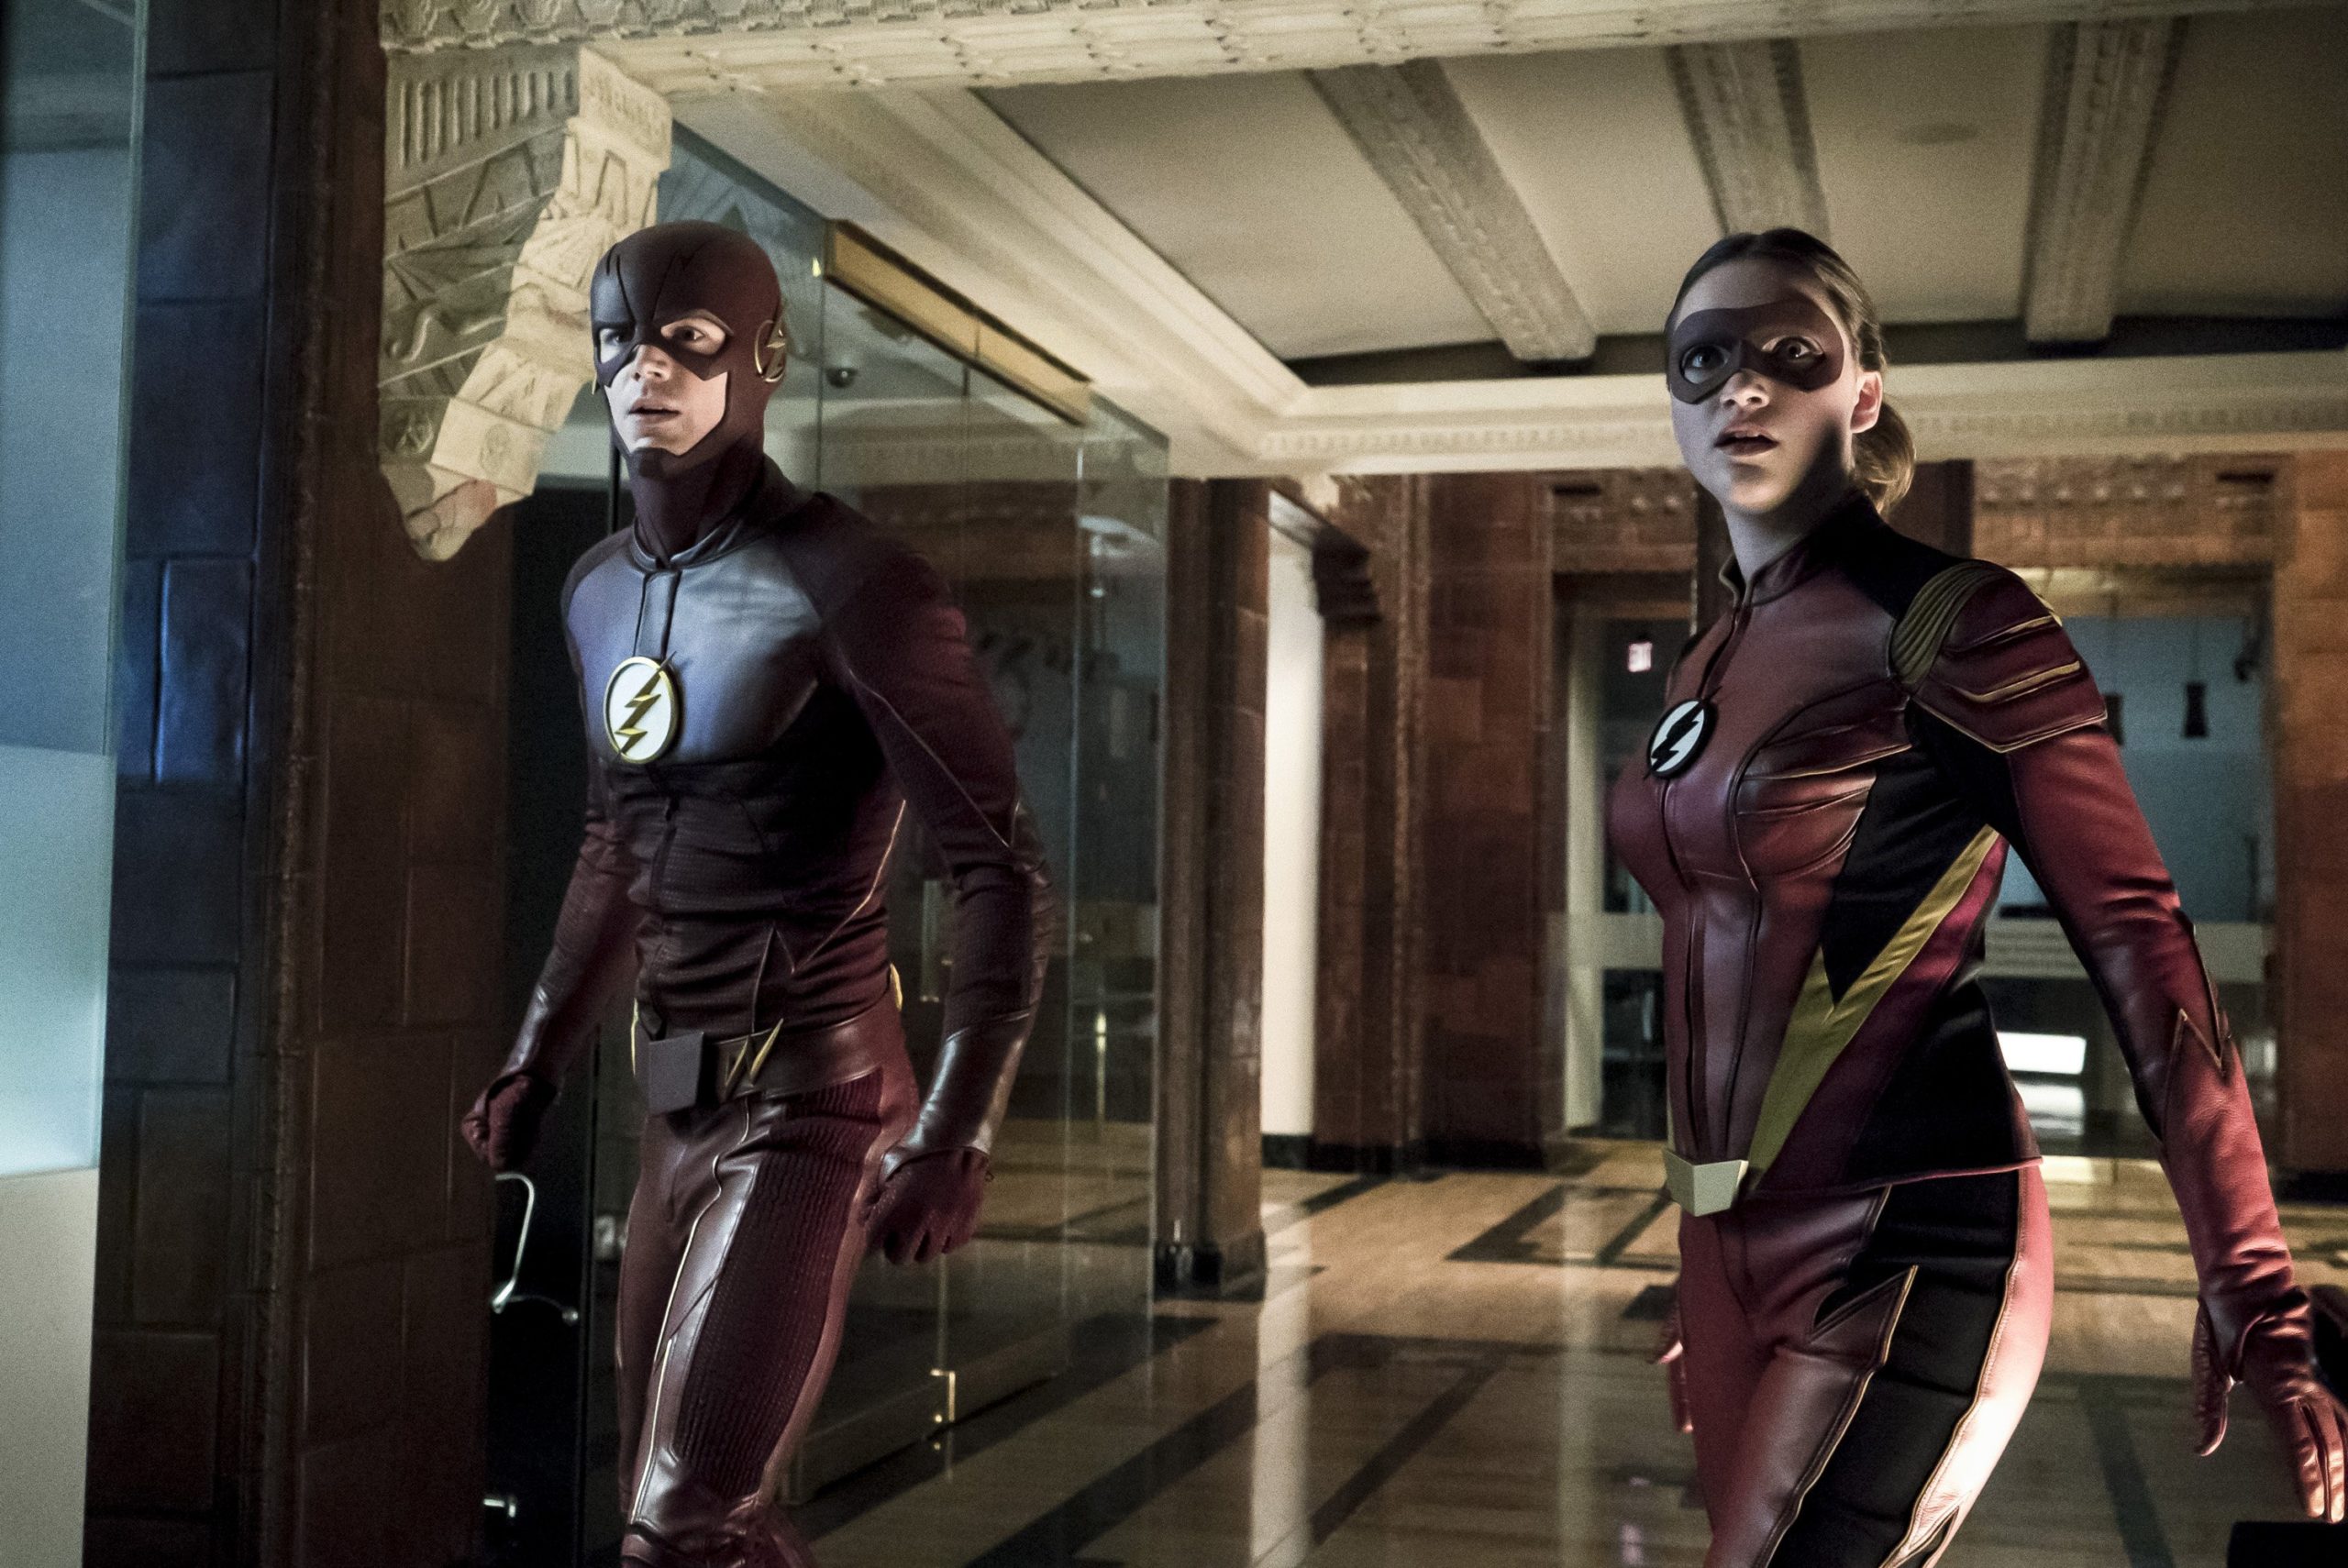 The Flash: Between Heroes and Rogues